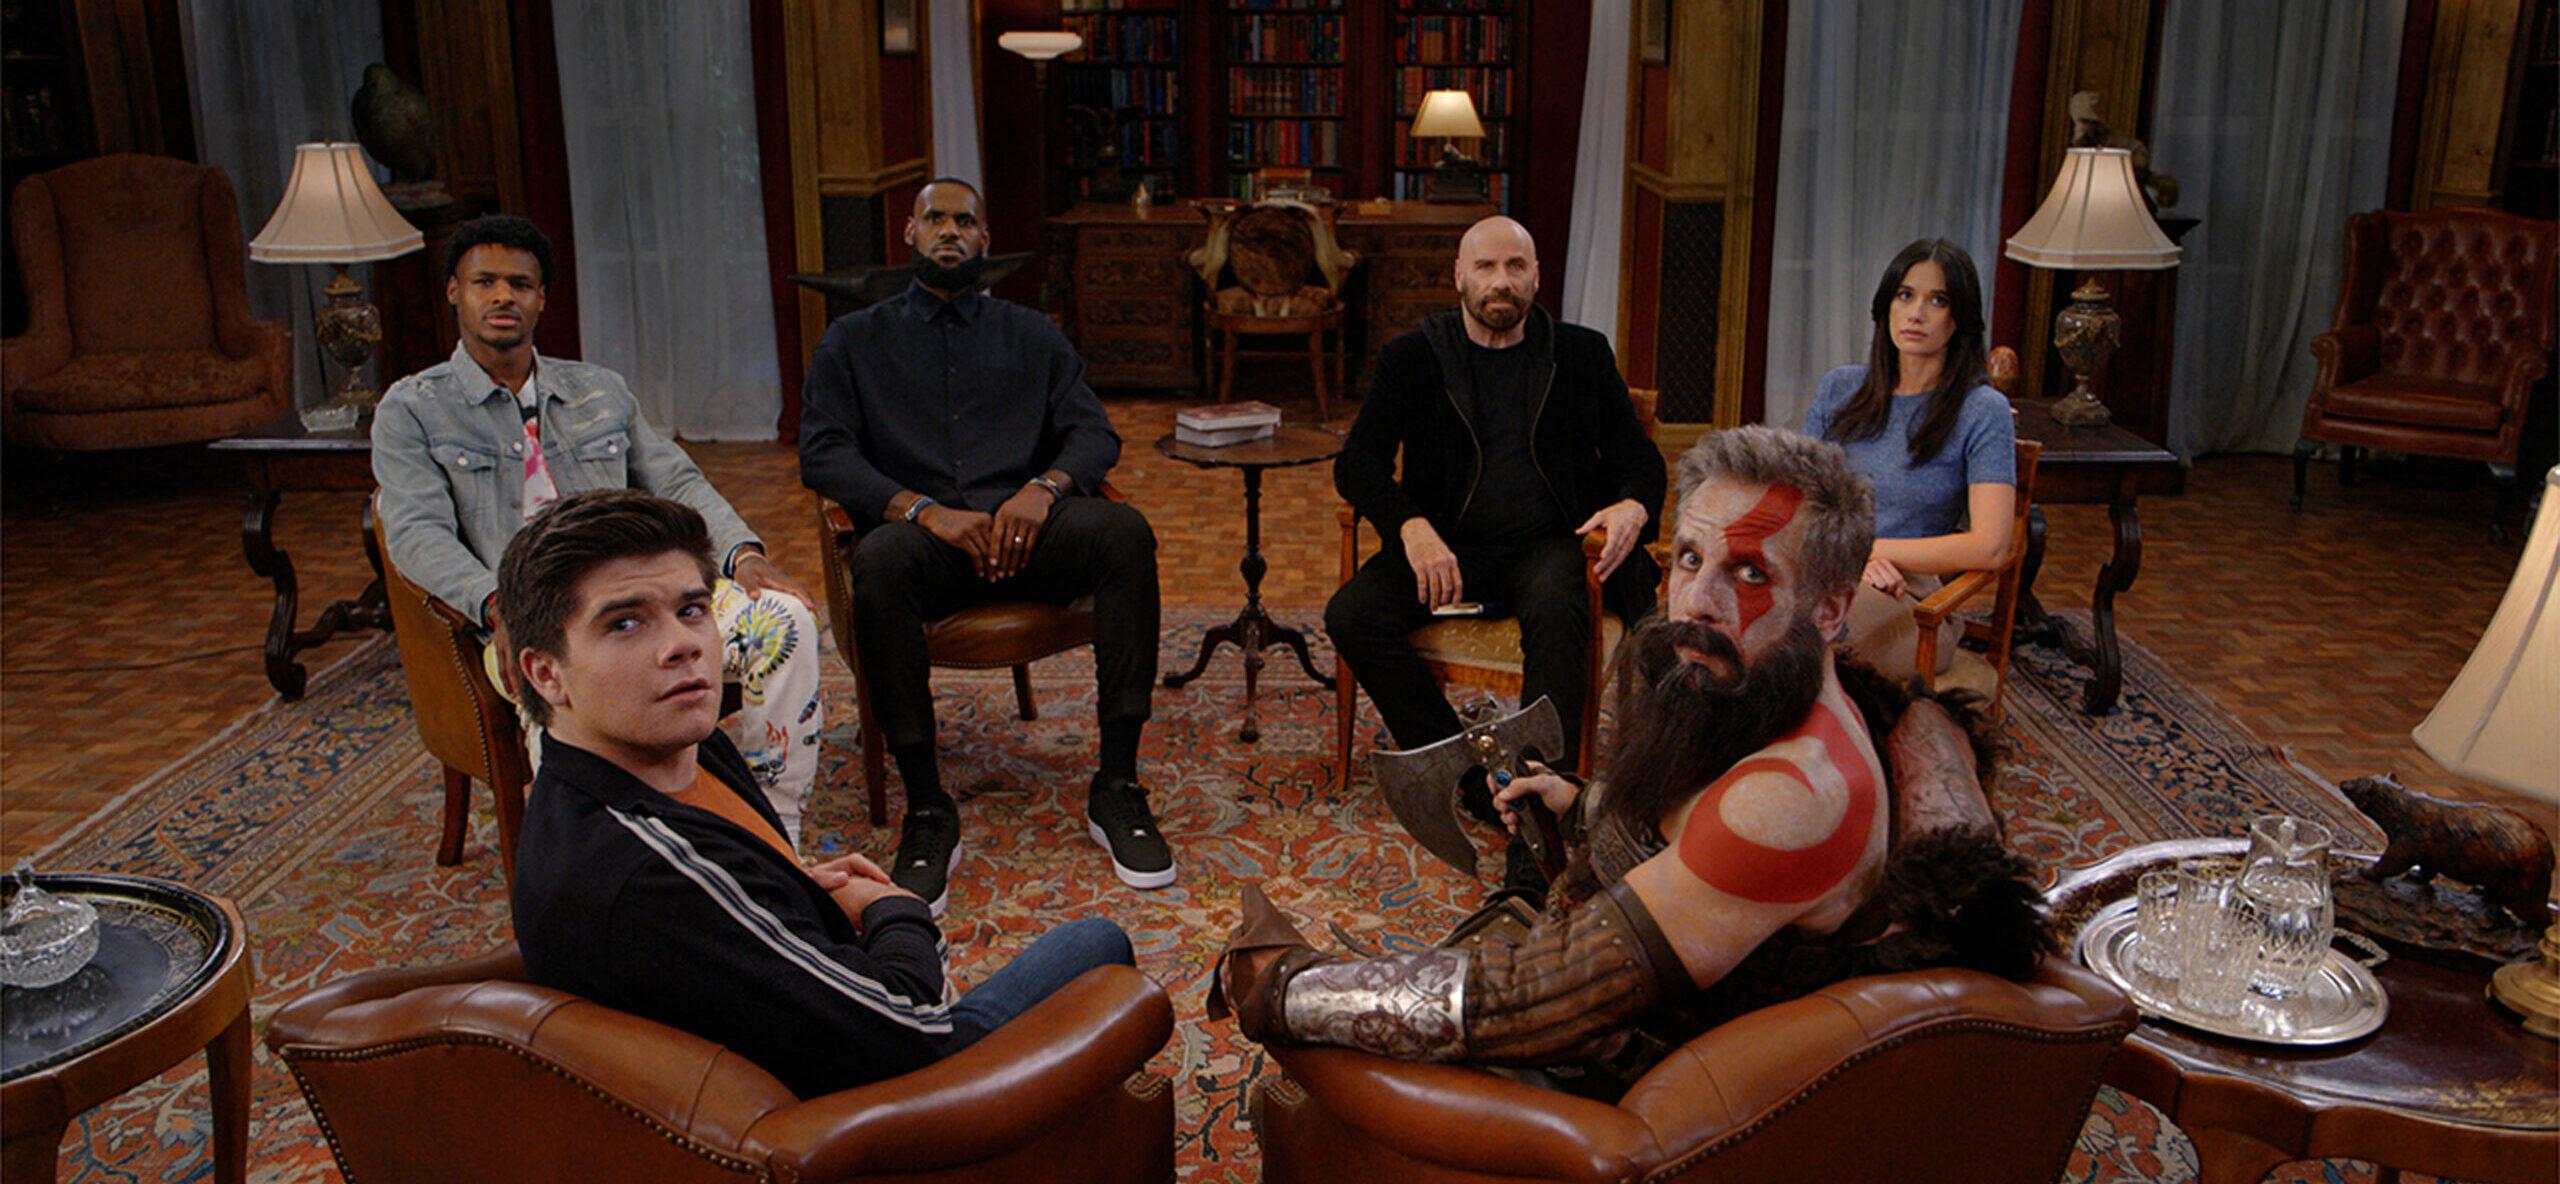 Celebrity dads Ben Stiller, John Travolta and LeBron James star with their kids in fun campaign for Sony PlayStations new God of War Ragnarök game